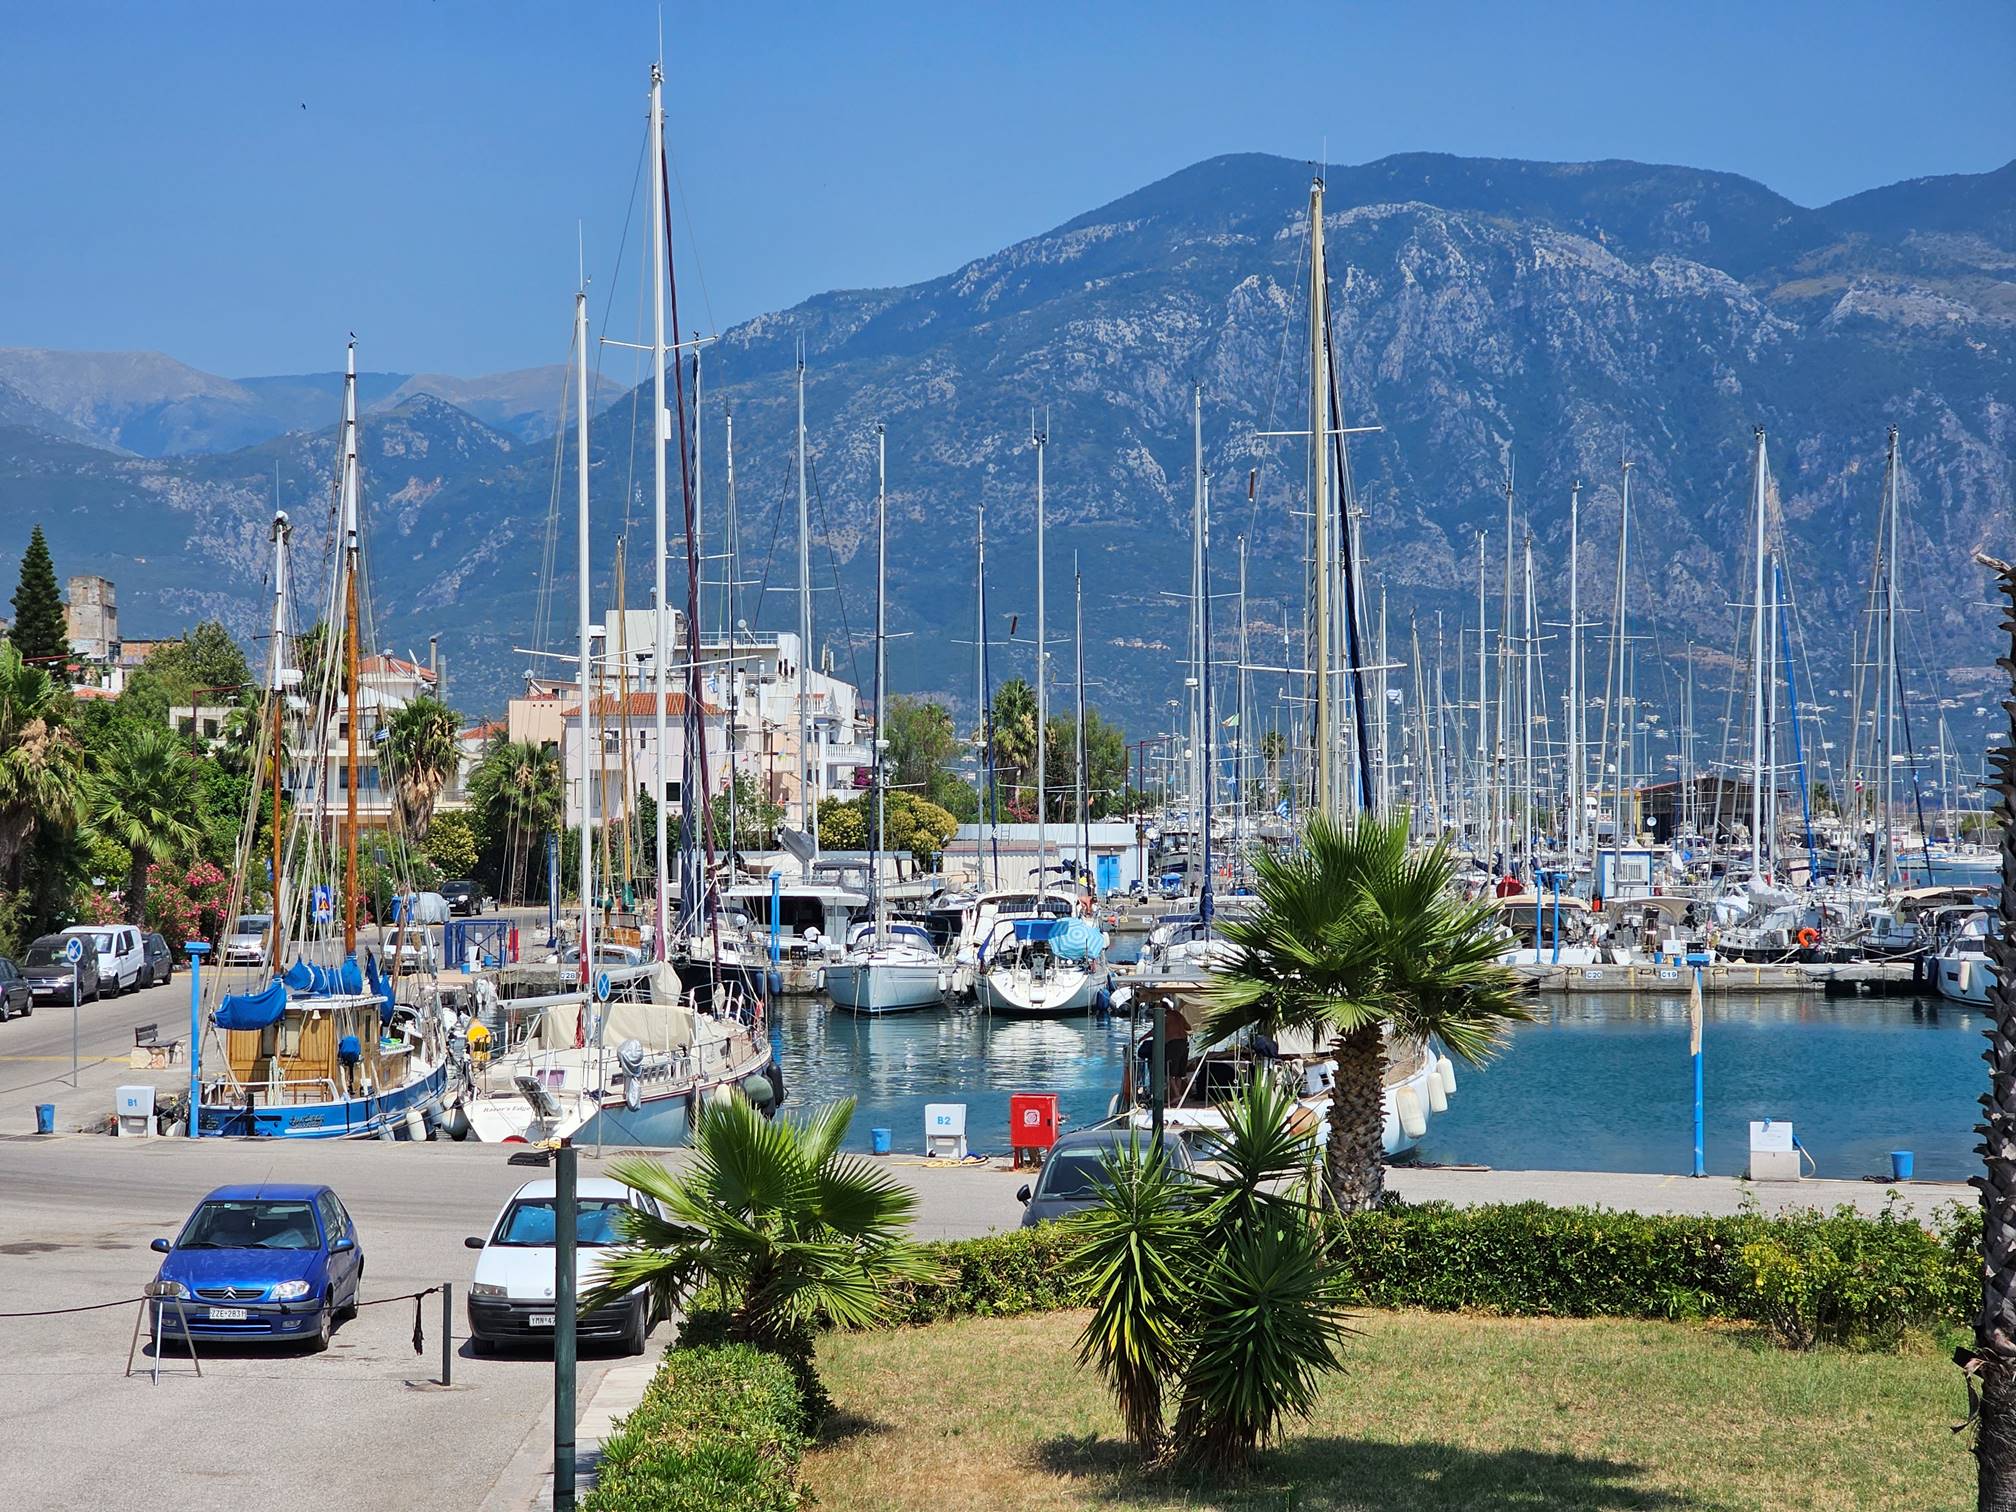 A marina with many boats and a mountain in the background

Description automatically generated